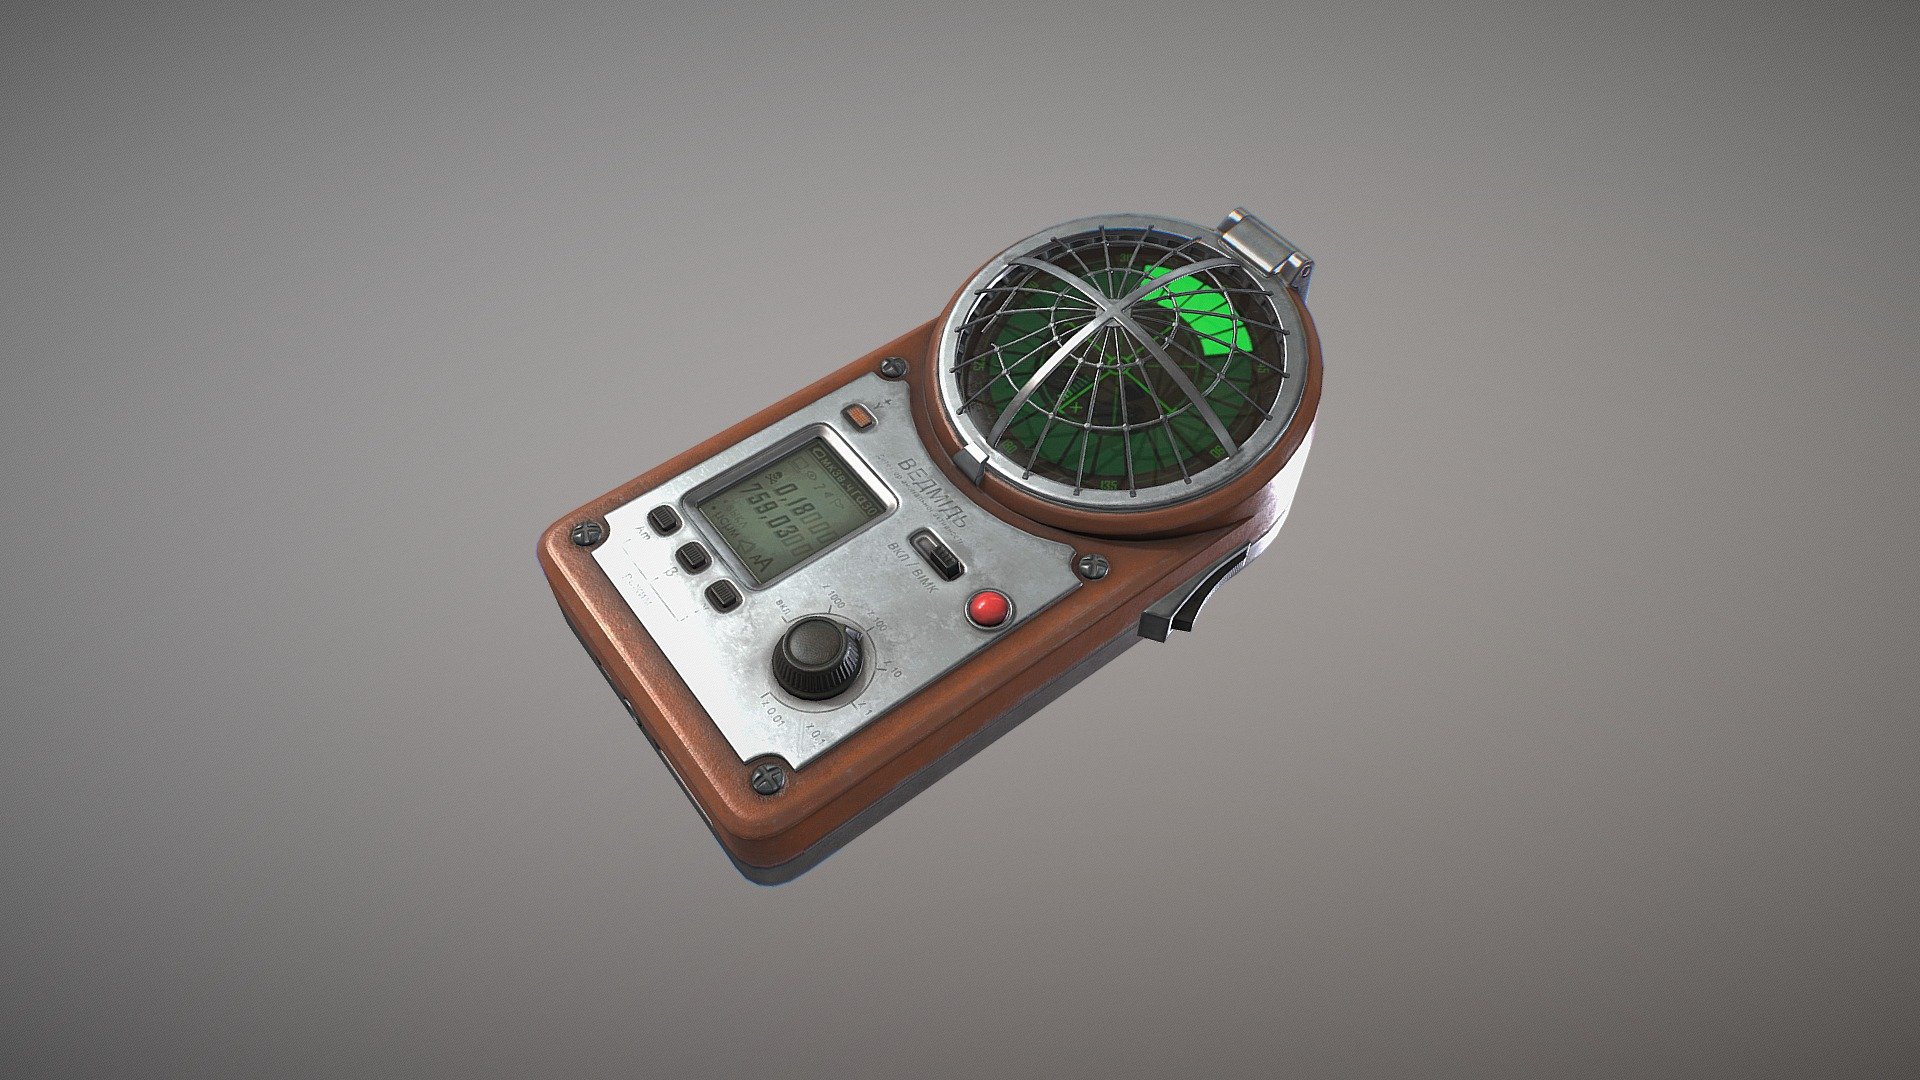 My remake of model Bear Detector from game S.T.A.L.K.E.R.

You can get this model for free on my CGTrader. Model is ready for Unity and Unreal Engine 4.

Your like is support for me:
https://www.artstation.com/artwork/VggO1n - Bear Detector - STALKER Fan Art - Download Free 3D model by roganzu 3d model